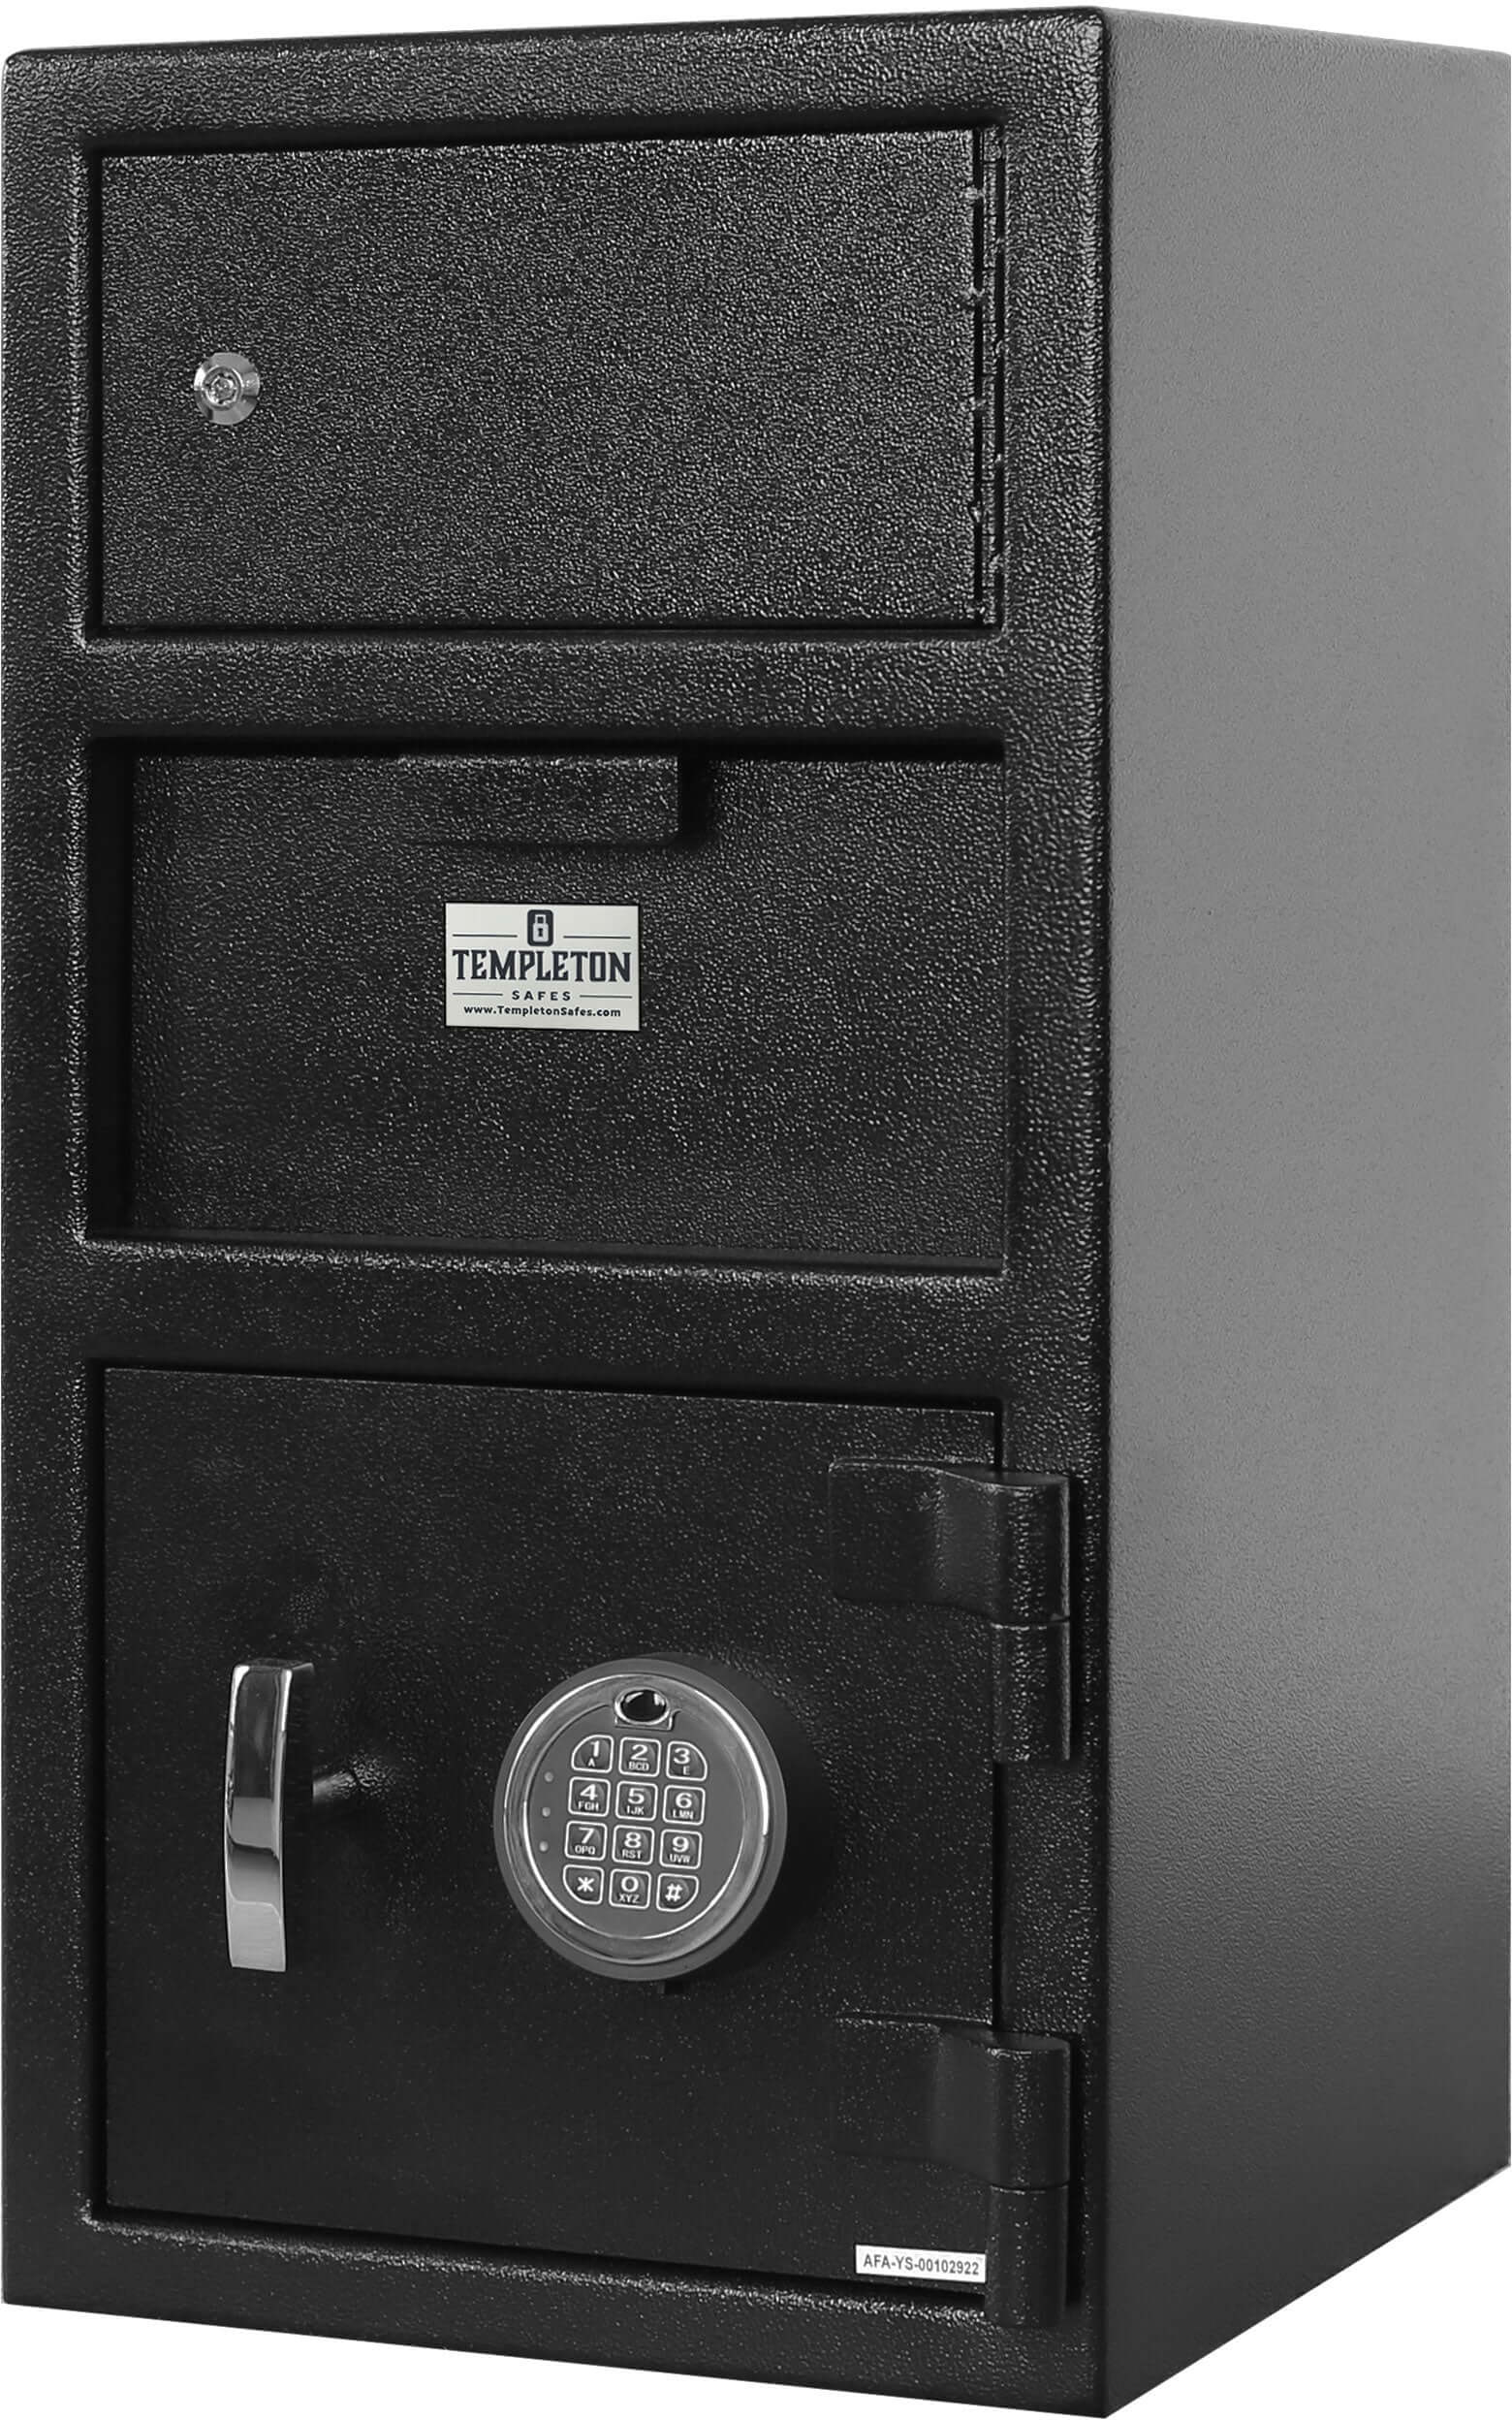 T867 Standard Depository Drop Safe with Multi-user Keypad and Additional Lock Box